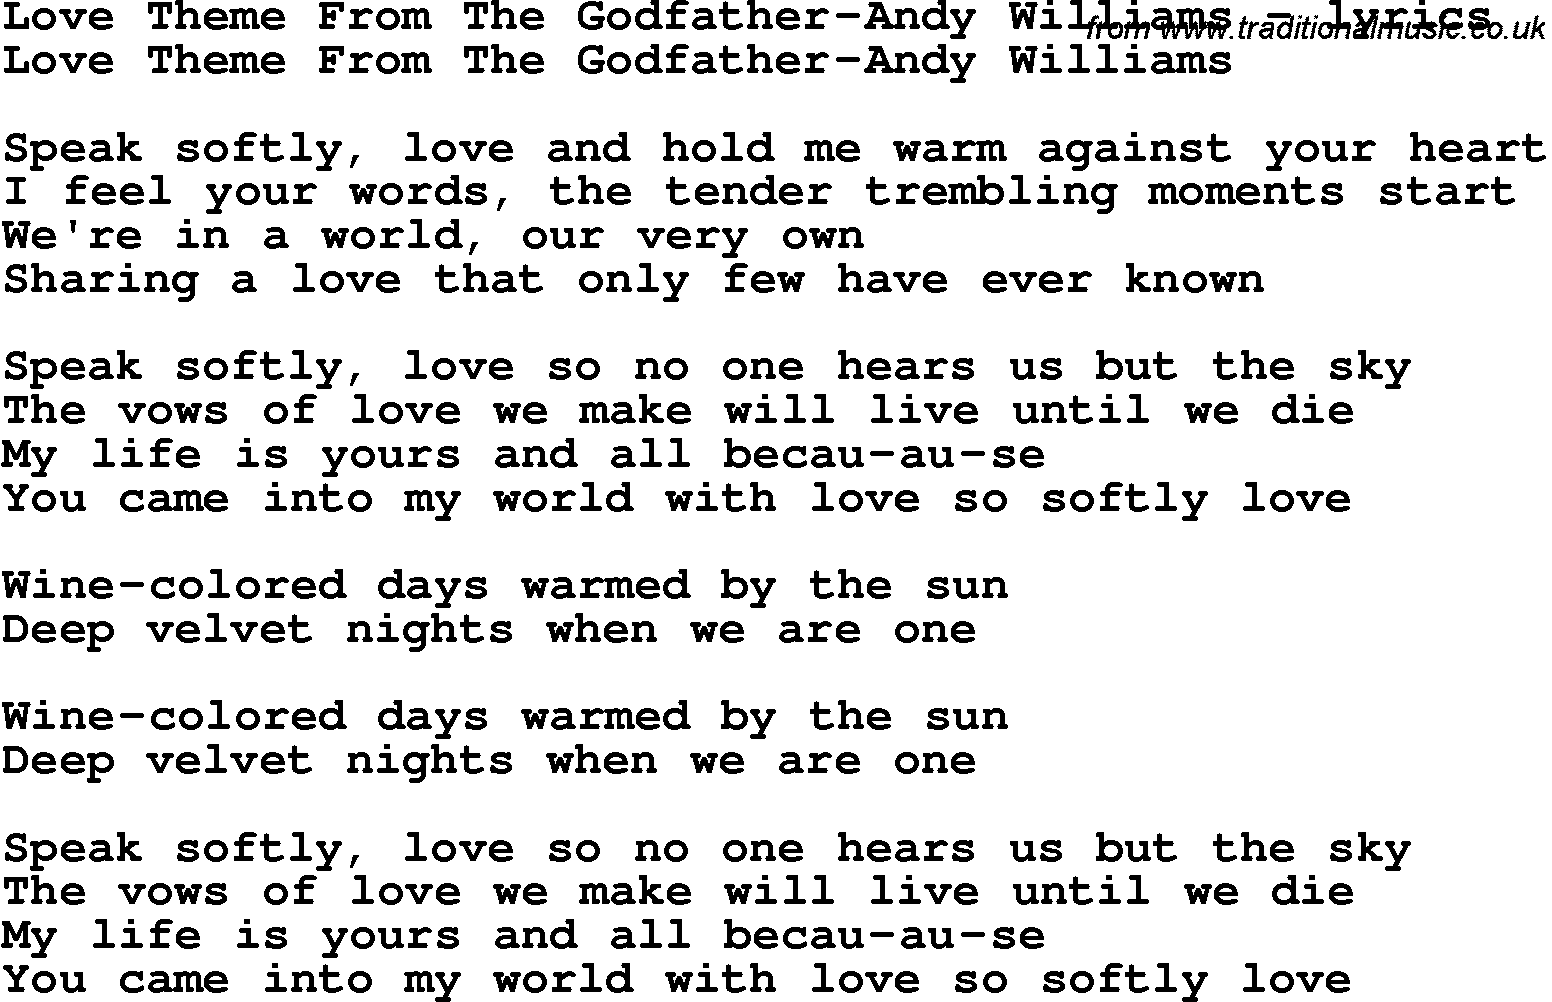 Love Song Lyrics for: Love Theme From The Godfather-Andy Williams